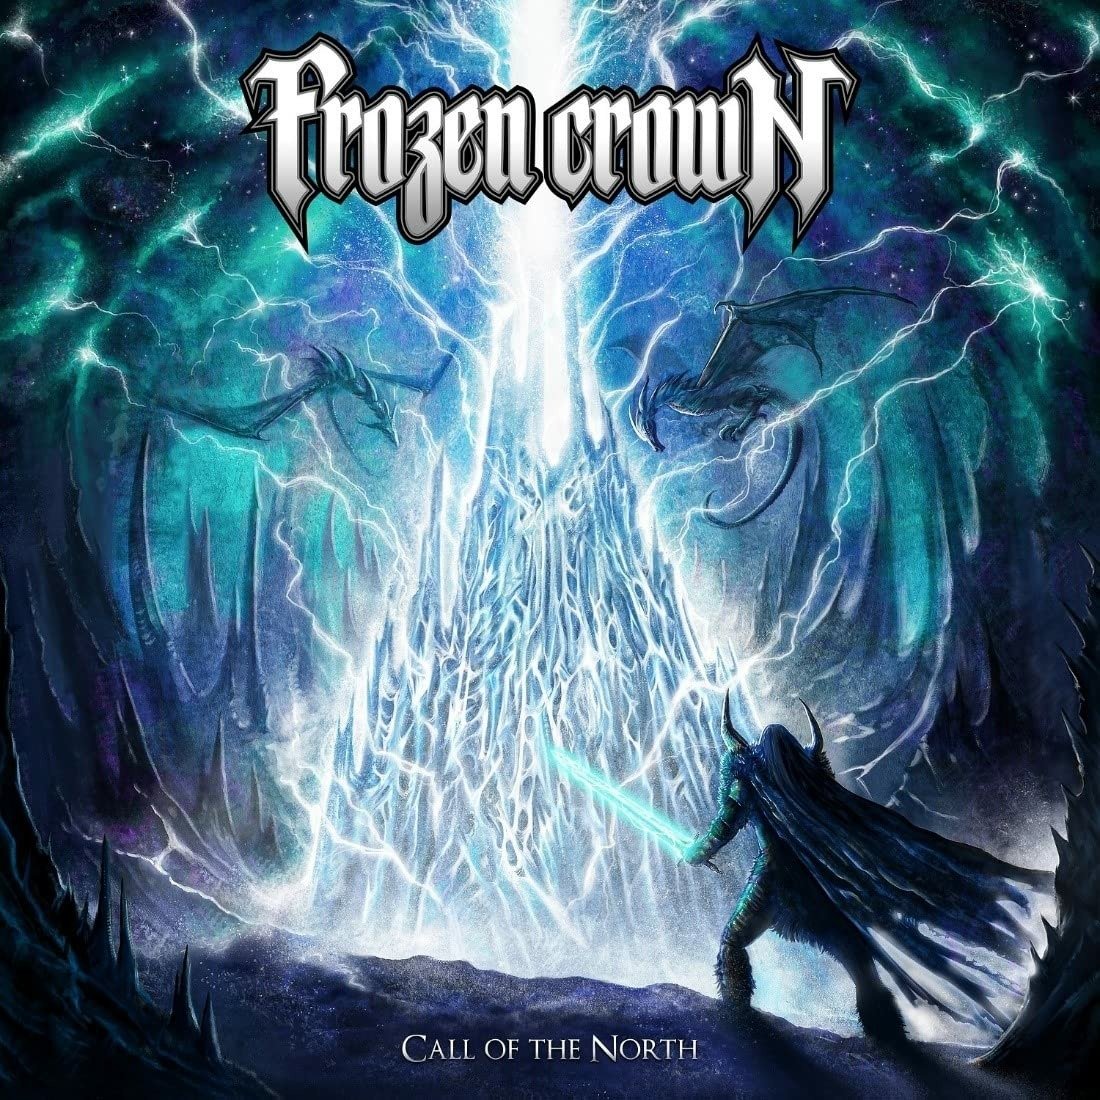 CD Shop - FROZEN CROWN CALL OF THE NORTH